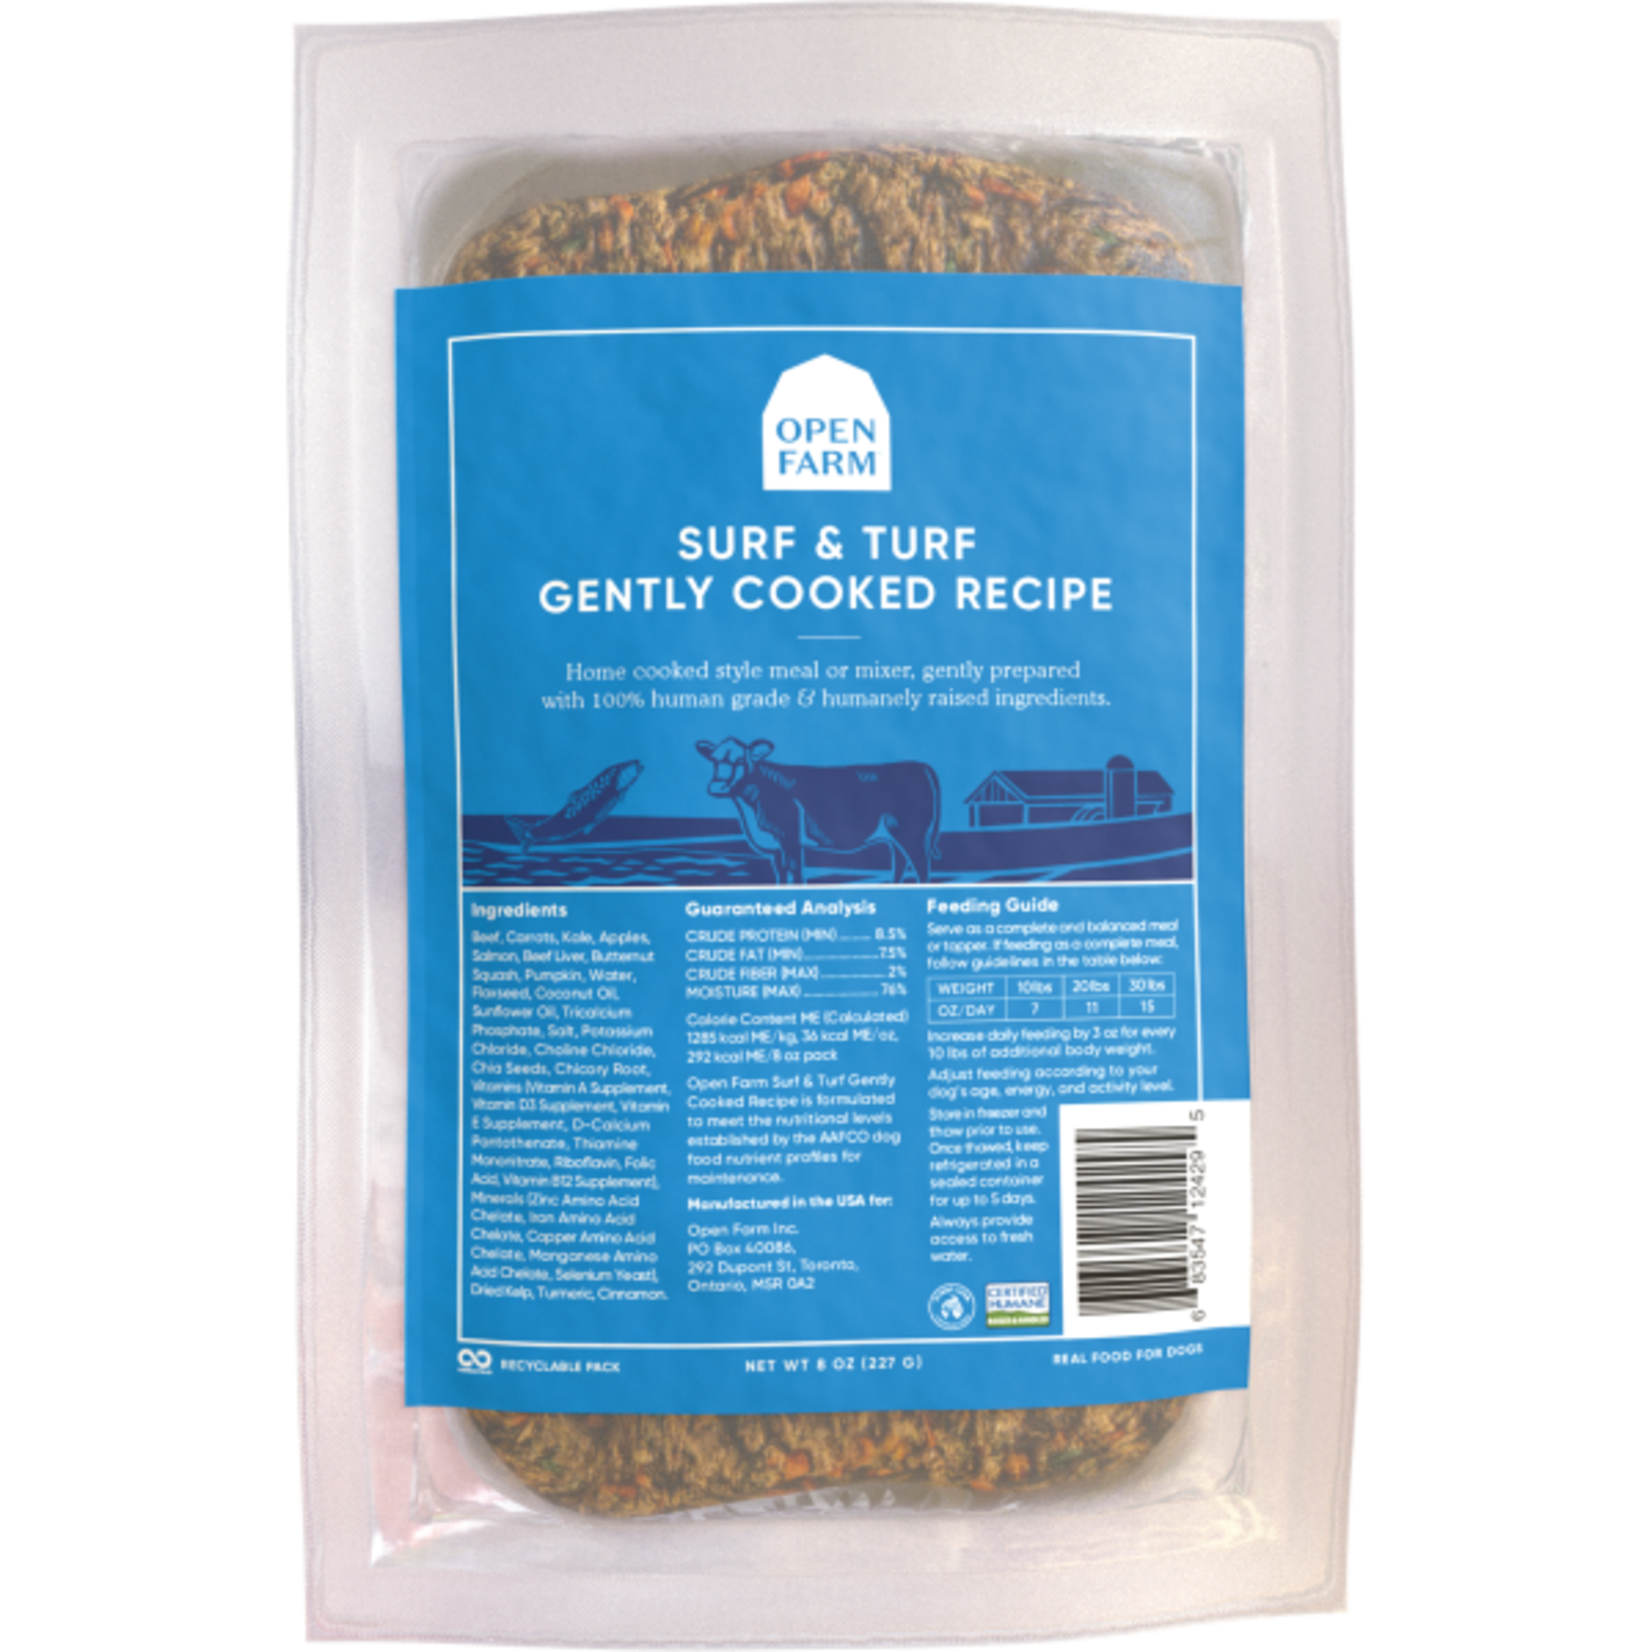 Open Farm Open Farm Dog Gently Cooked Surf & Turf 8 oz